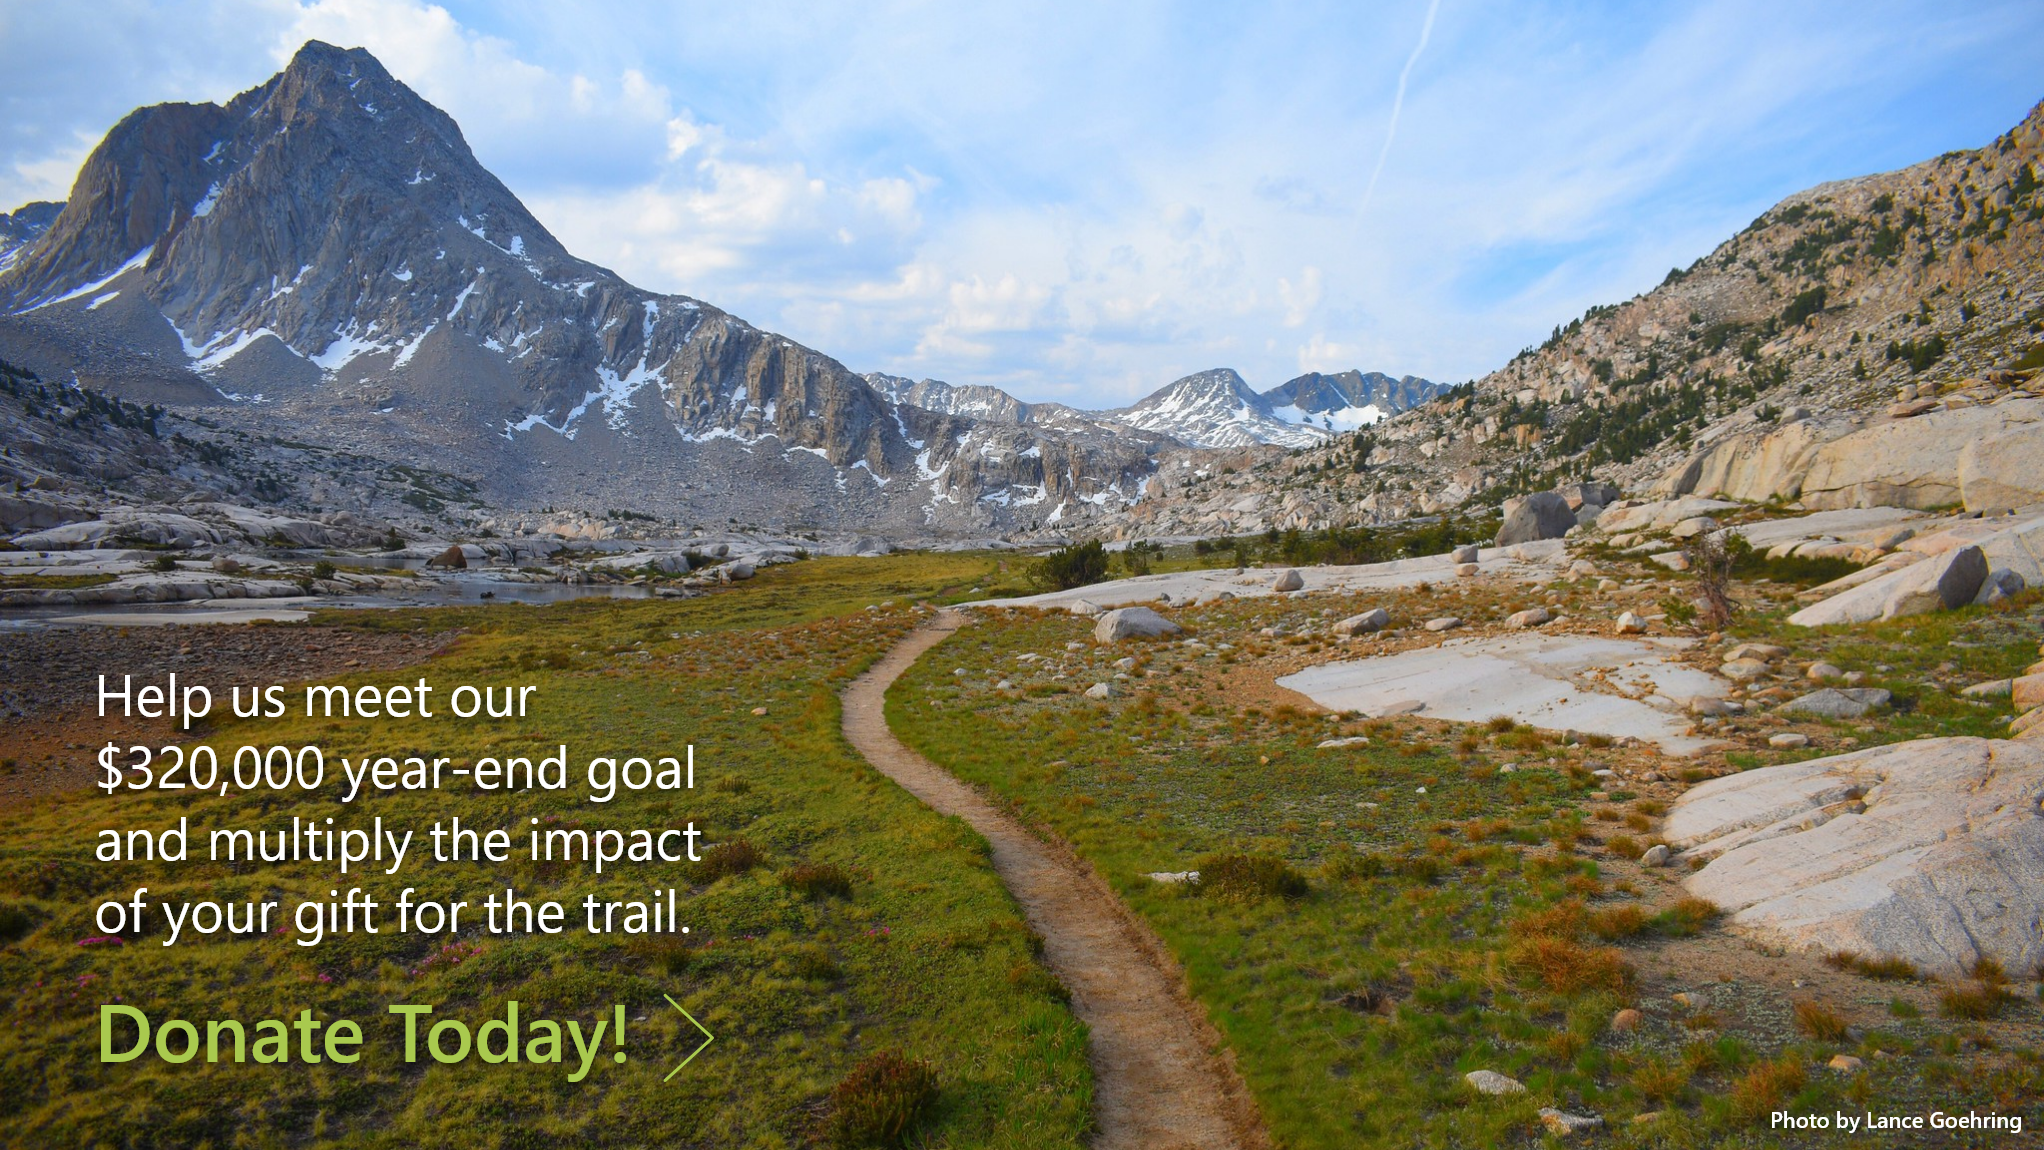 Help us meet our $320,000 year-end goal
and multiply the impact of your gift for the trail.